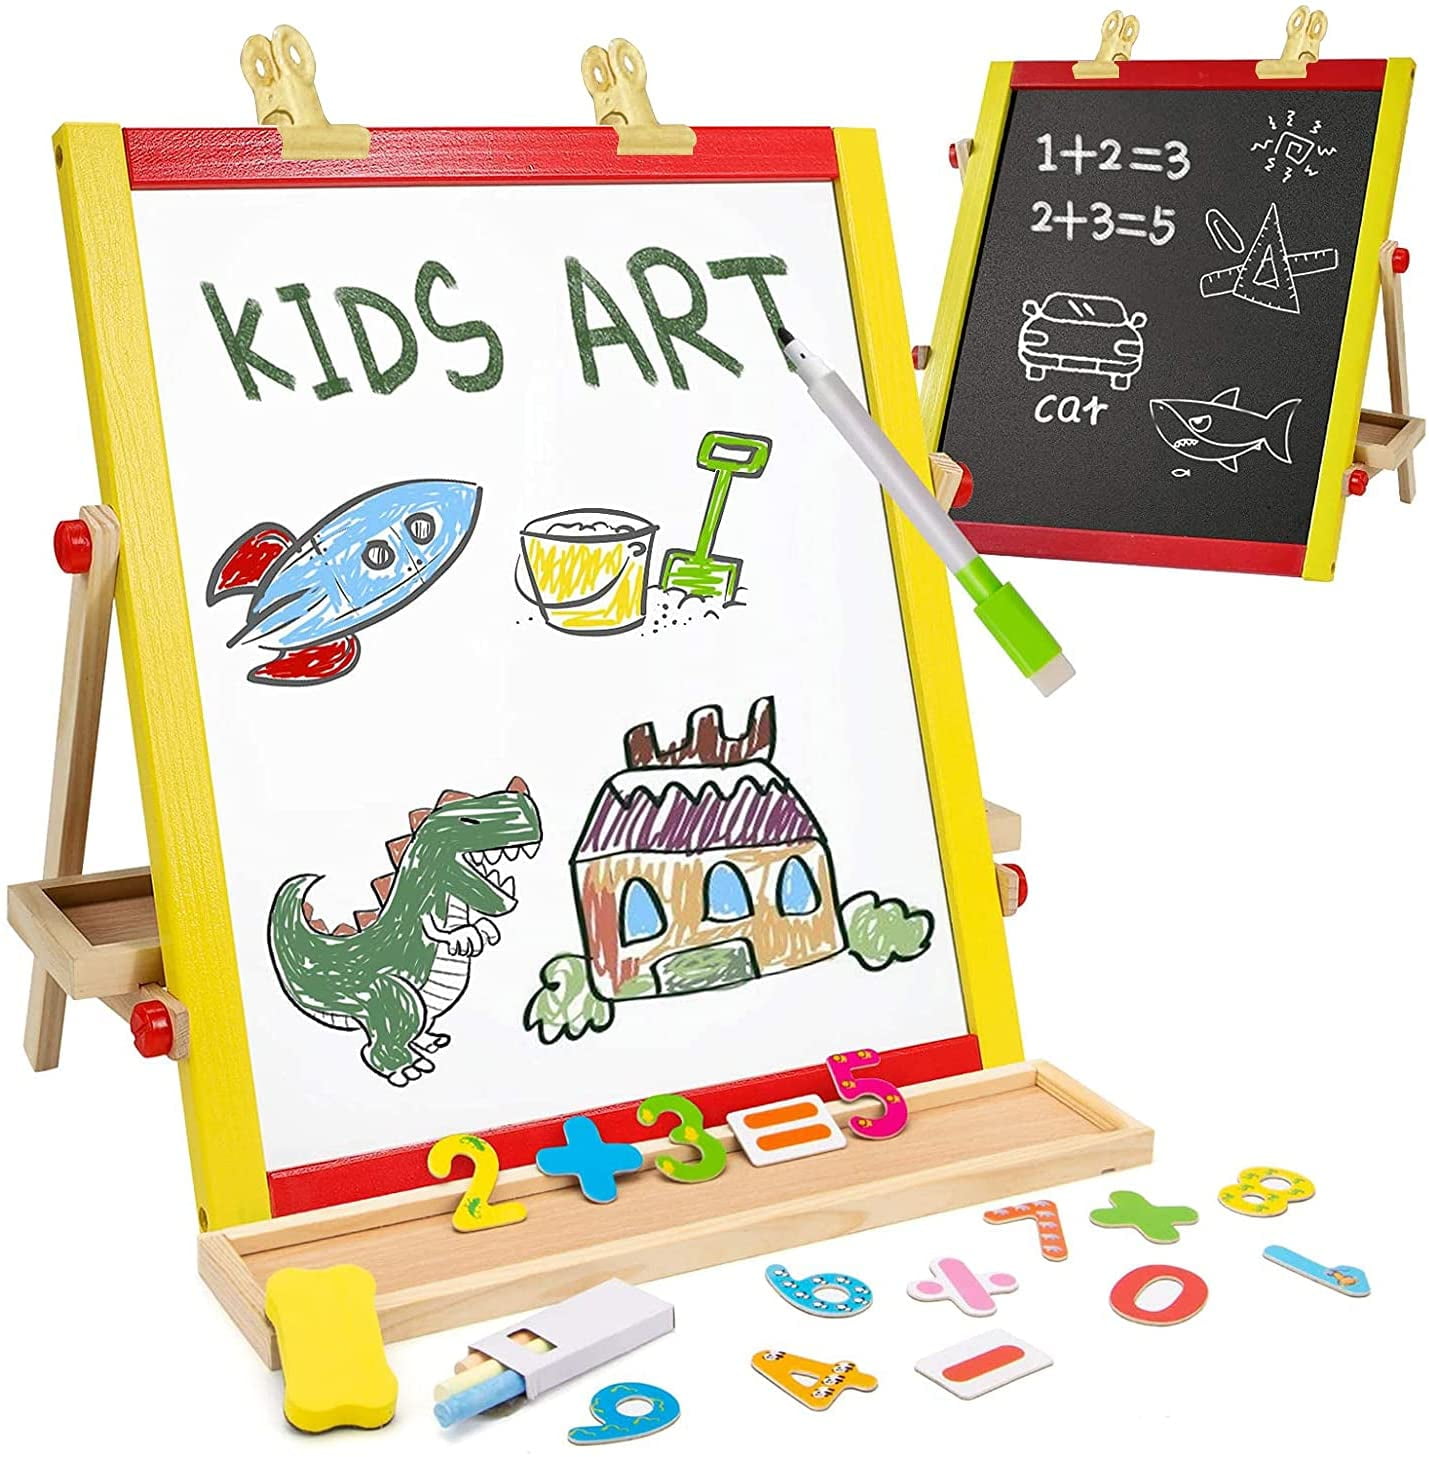 Toddler Double Sided Easel-Learning Table for Toddlers Tabletop Easels for Painting Double Sided Kids Art Easels